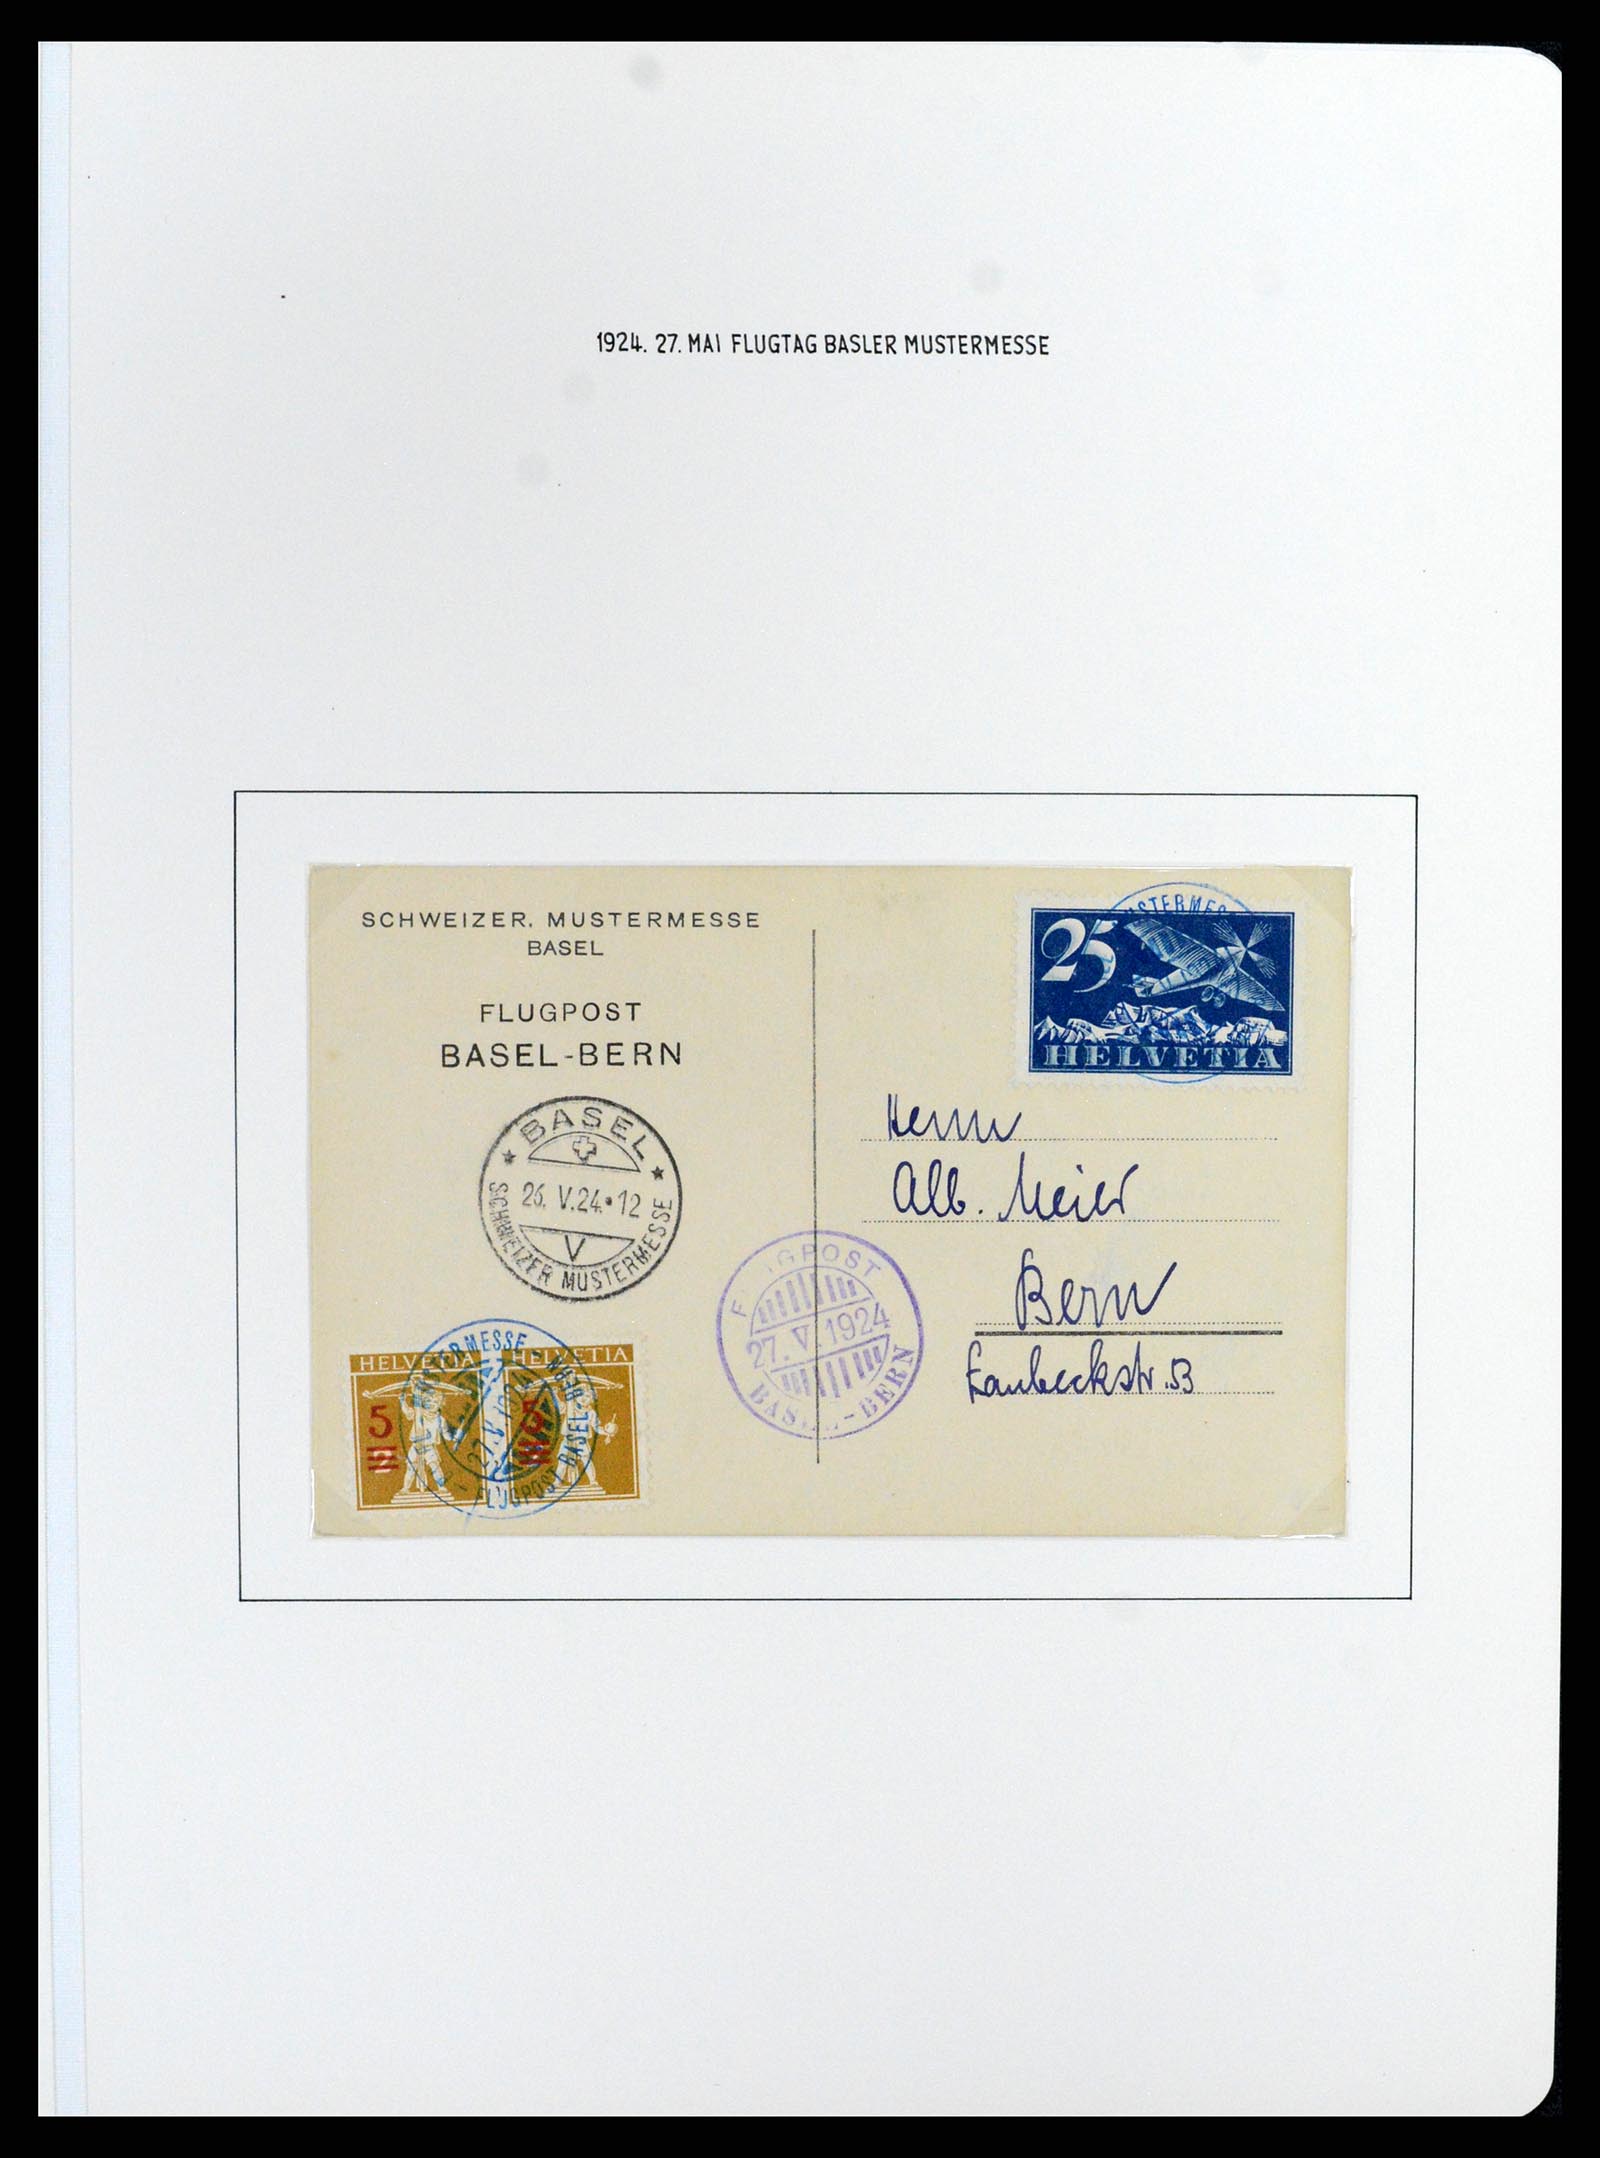 37700 019 - Stamp collection 37700 Switzerland airmail cover collection 1922-1960.